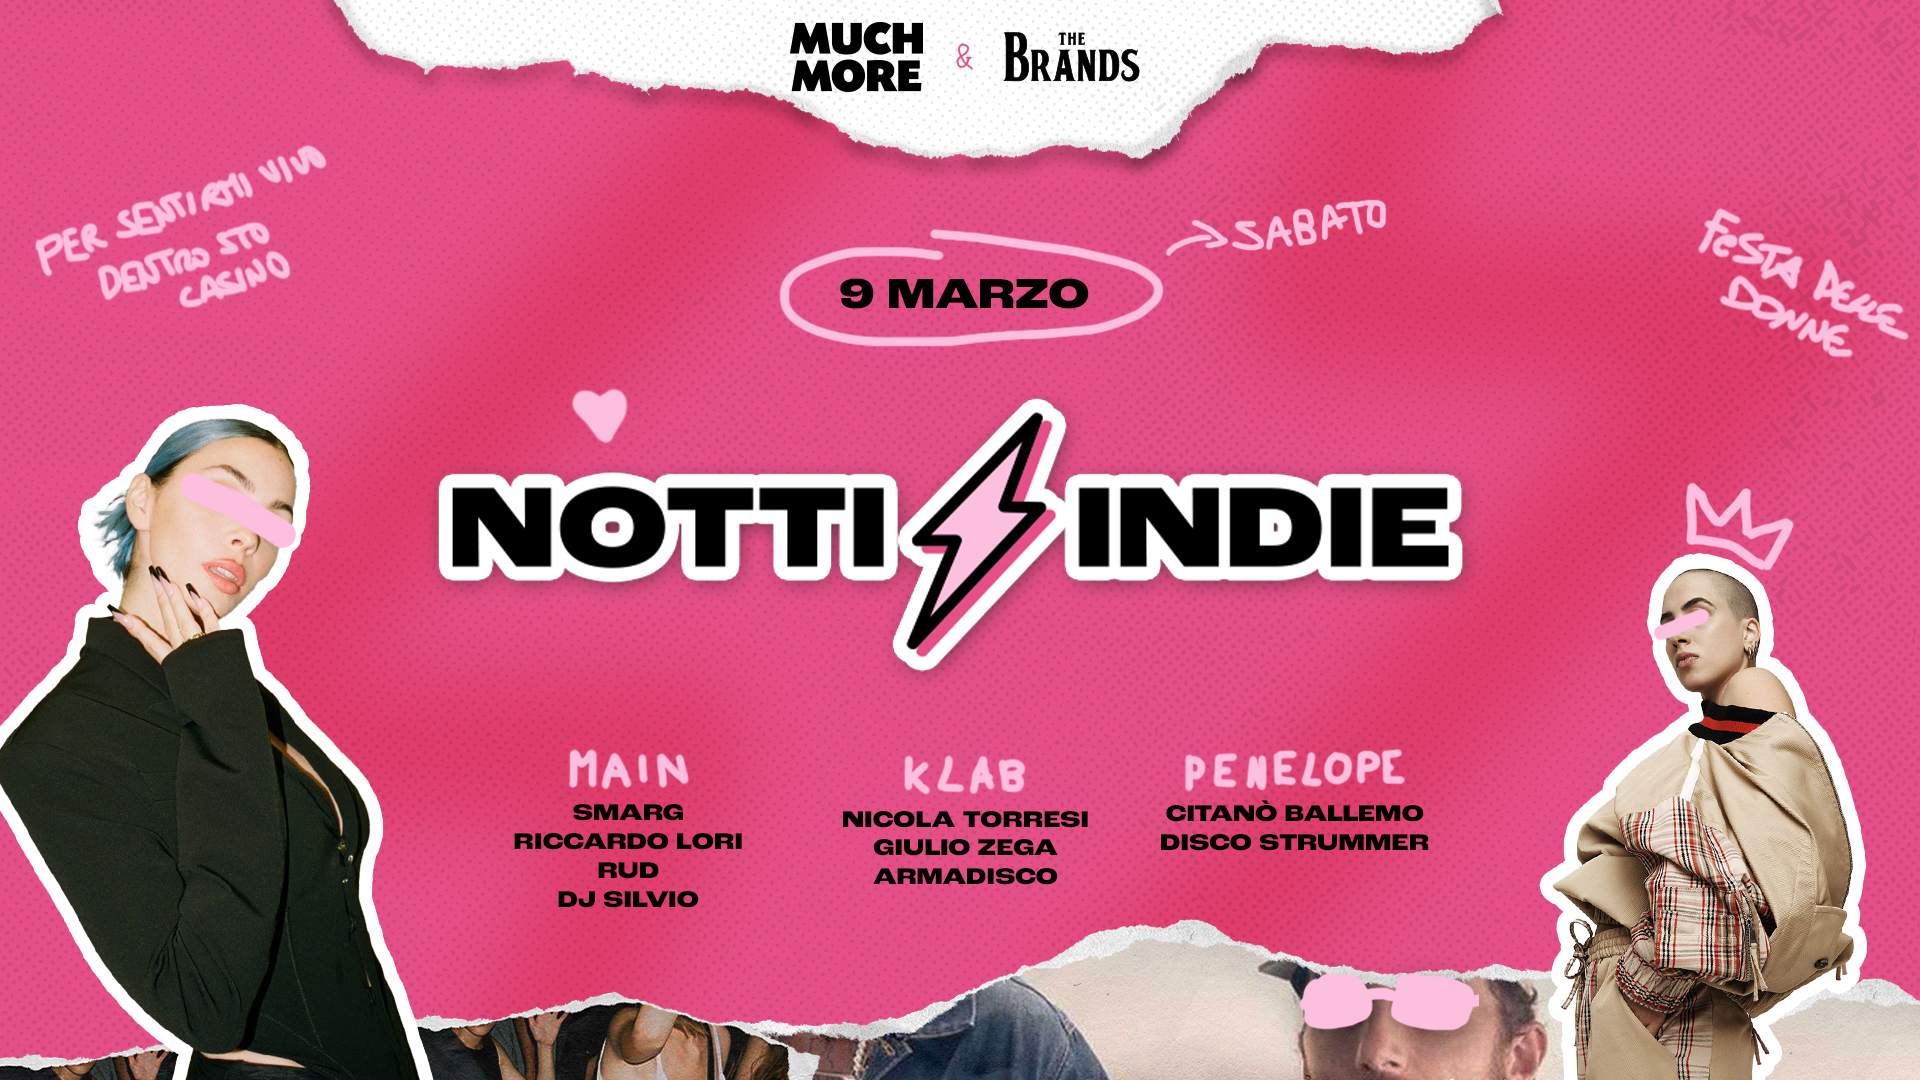 MUCH MORE • Notti Indie & The Brands - フライヤー表